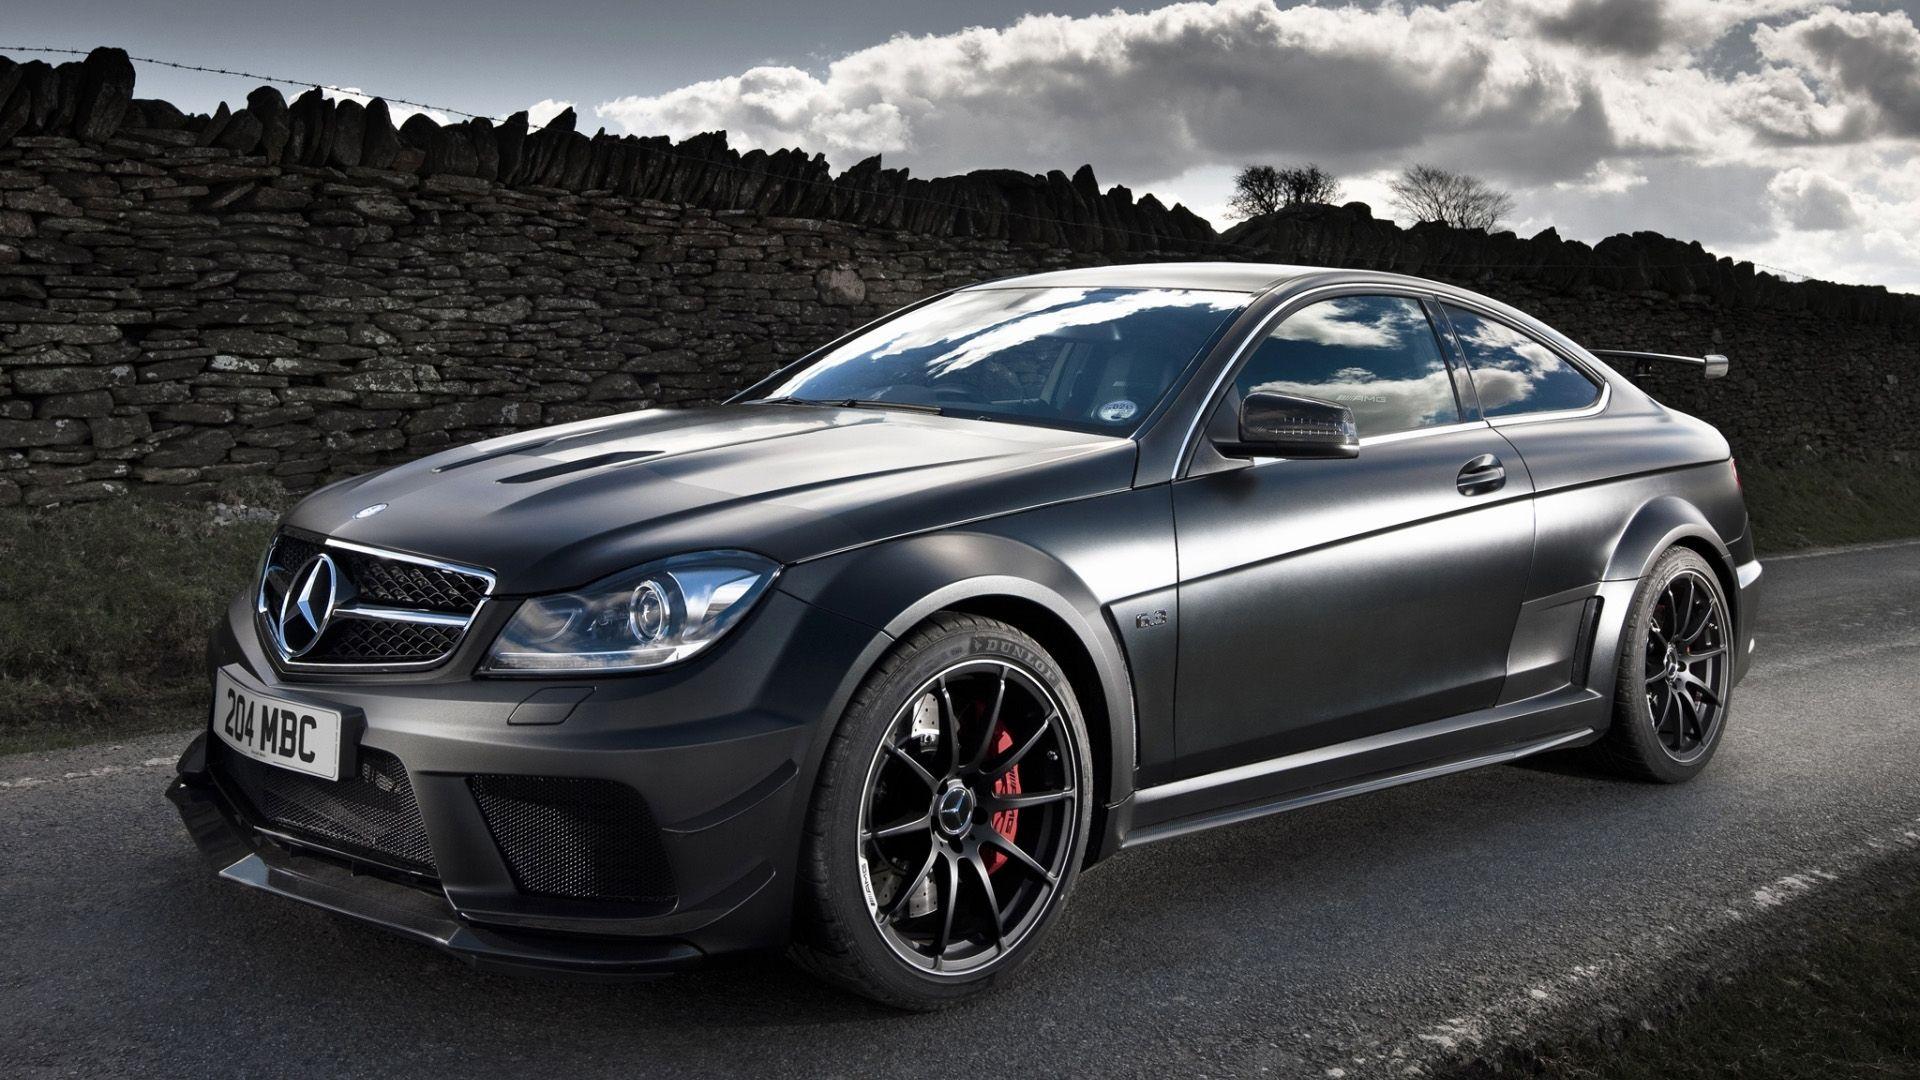 AMG C63 Wallpapers - Wallpaper Cave